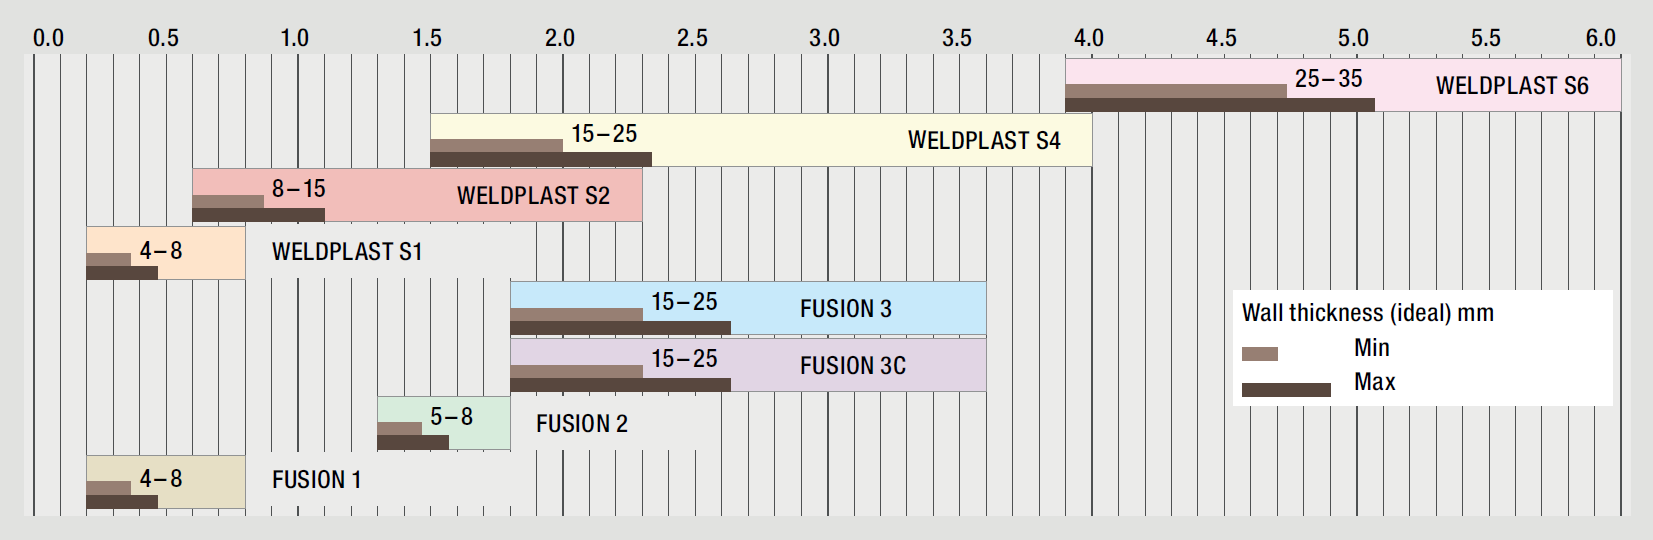 Extrusion welder output overview chart